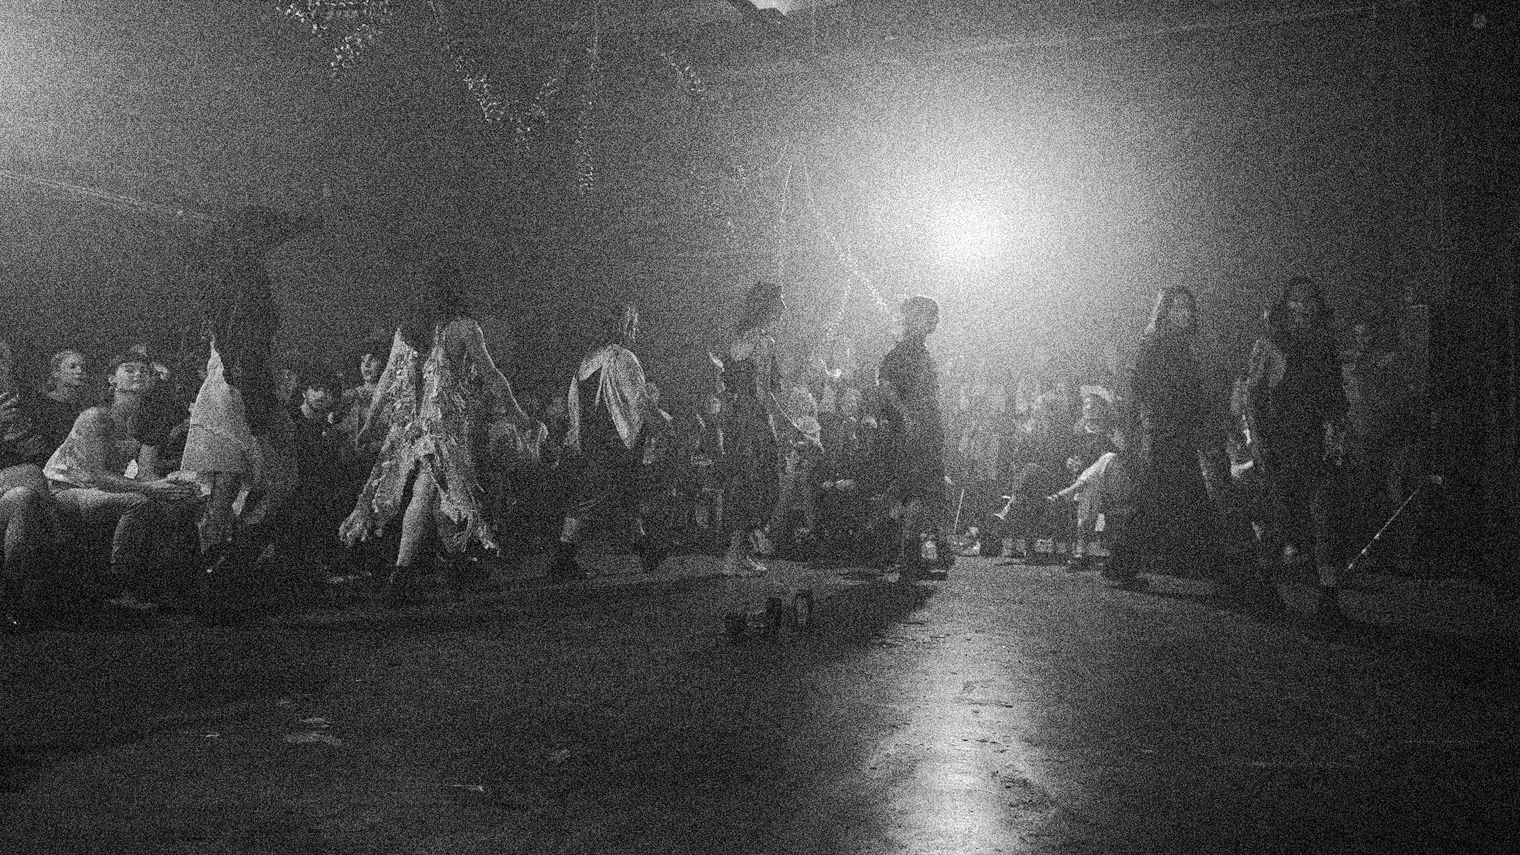 Several people partake in a fashion show performance.